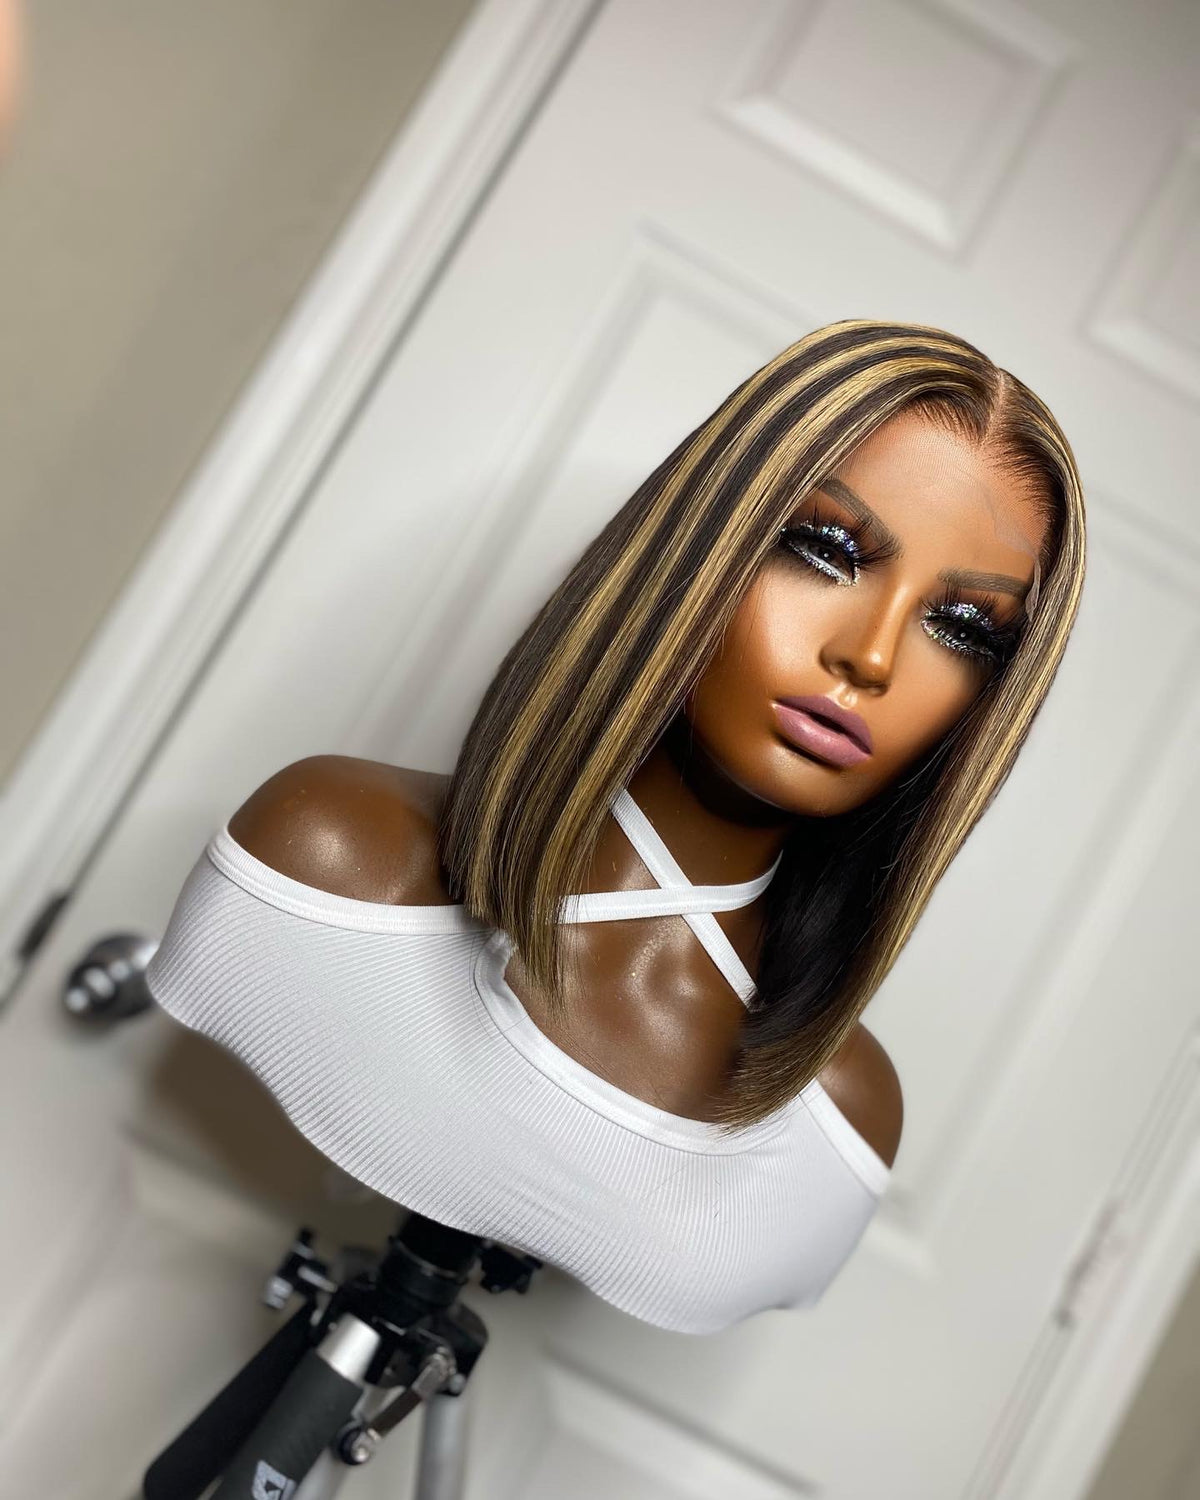 closure wig, lace closure wig, 5x5 closure wig, light brown hair with blonde highlights, light brown hair with blonde highlights, brown hair with blonde highlights, bob wig, 12 inch wig, blunt cut bob wig